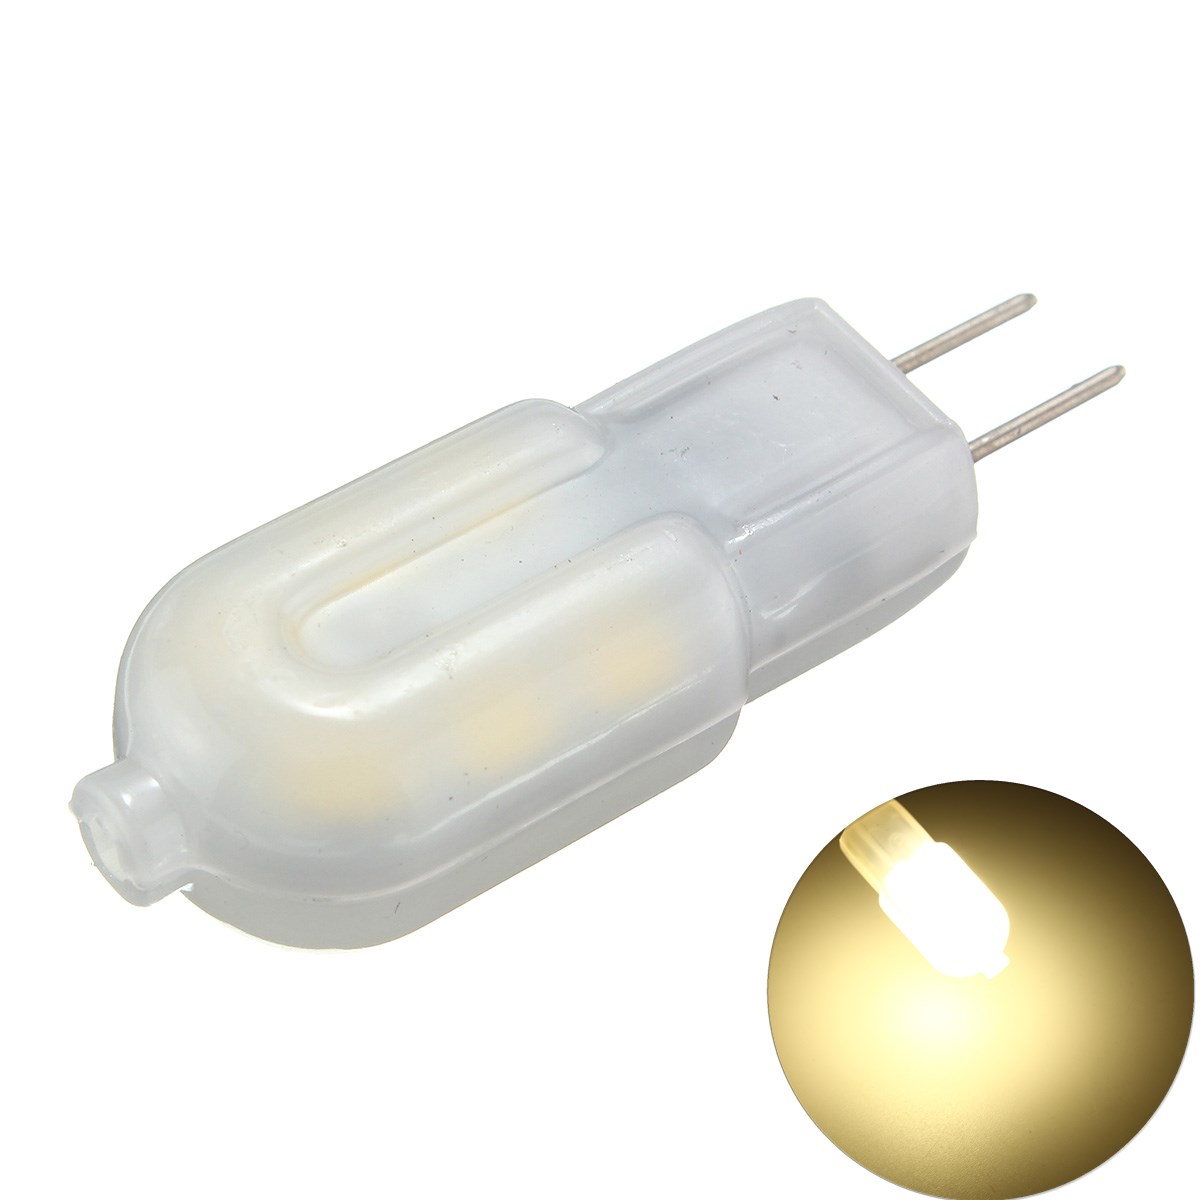 

6PCS DC12V G4 2W Non-dimmable SMD2835 Natural White Milk Cover LED Light Bulb for Indoor Home Decor